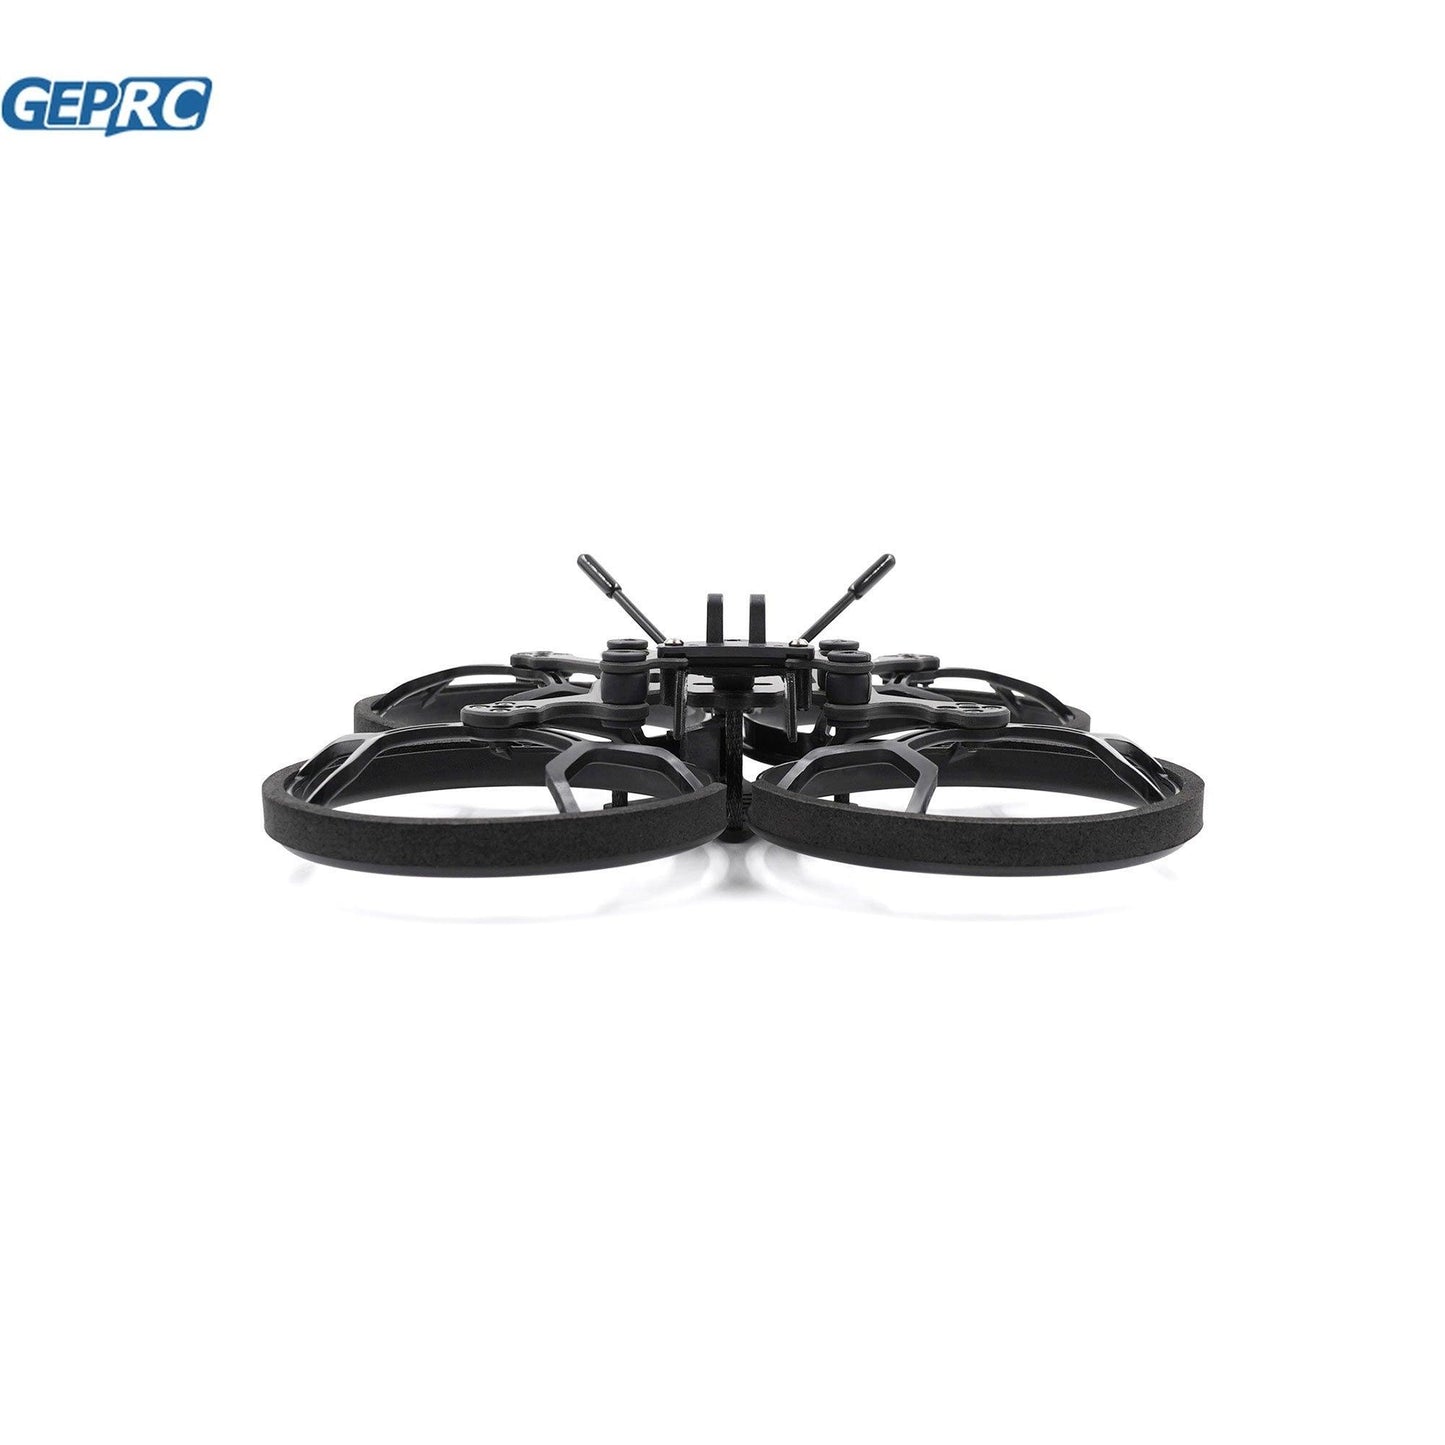 GEPRC GEP-CL30 Frame Kit Suitable For Cinelog30 Drone Carbon Fiber Frame For DIY RC FPV Quadcopter Drone Accessories Parts - RCDrone